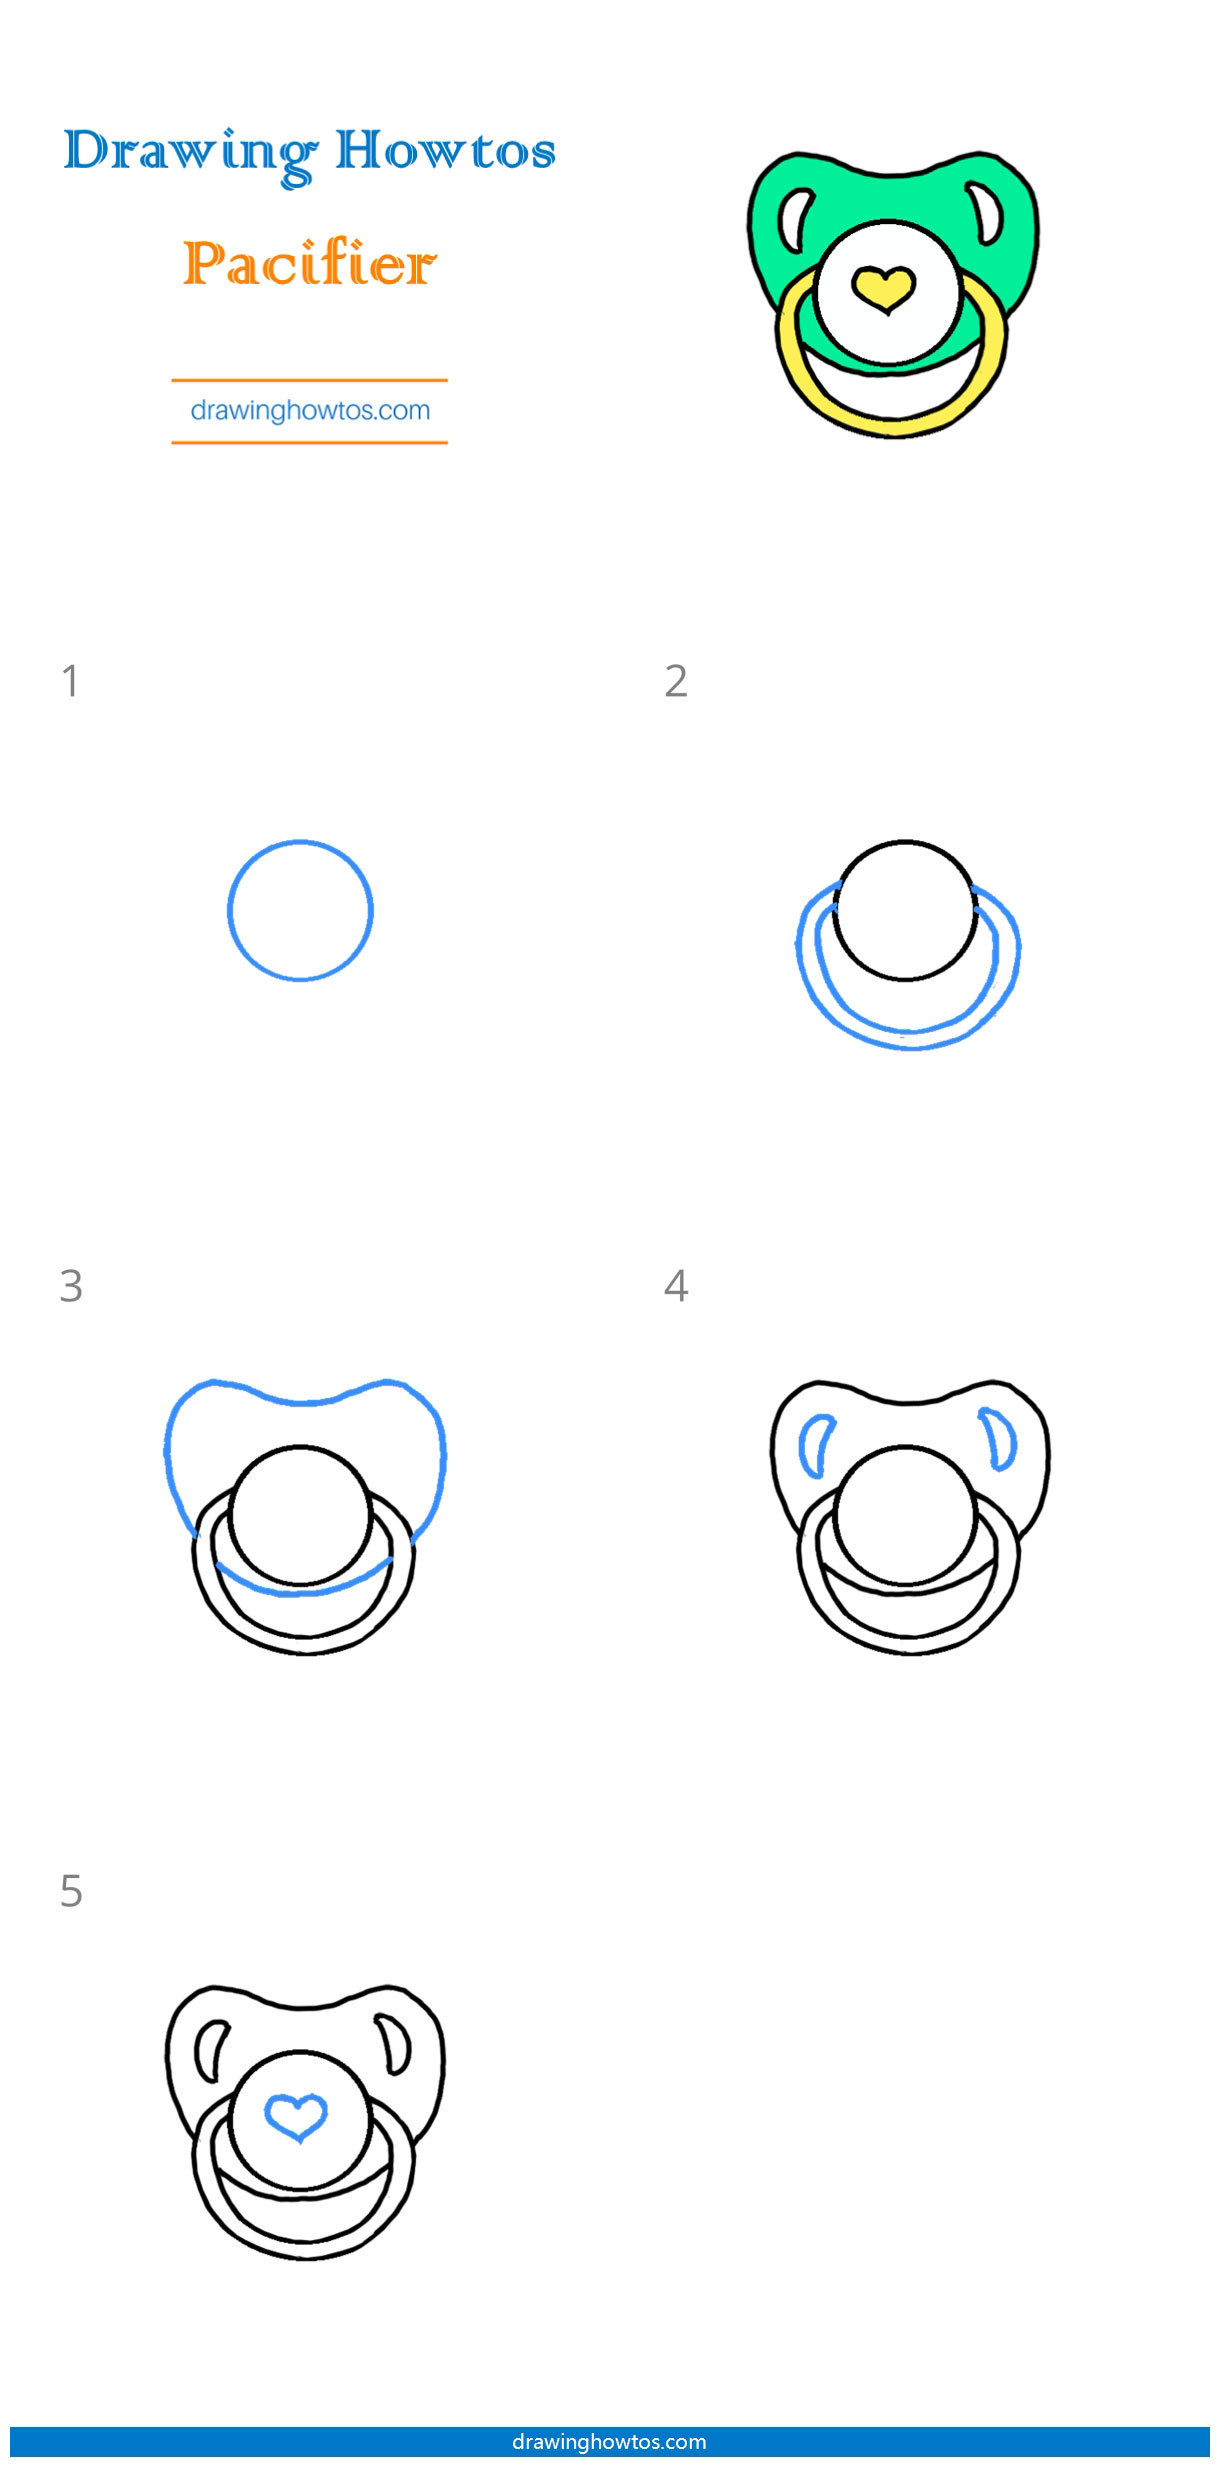 How to Draw a Pacifier Step by Step